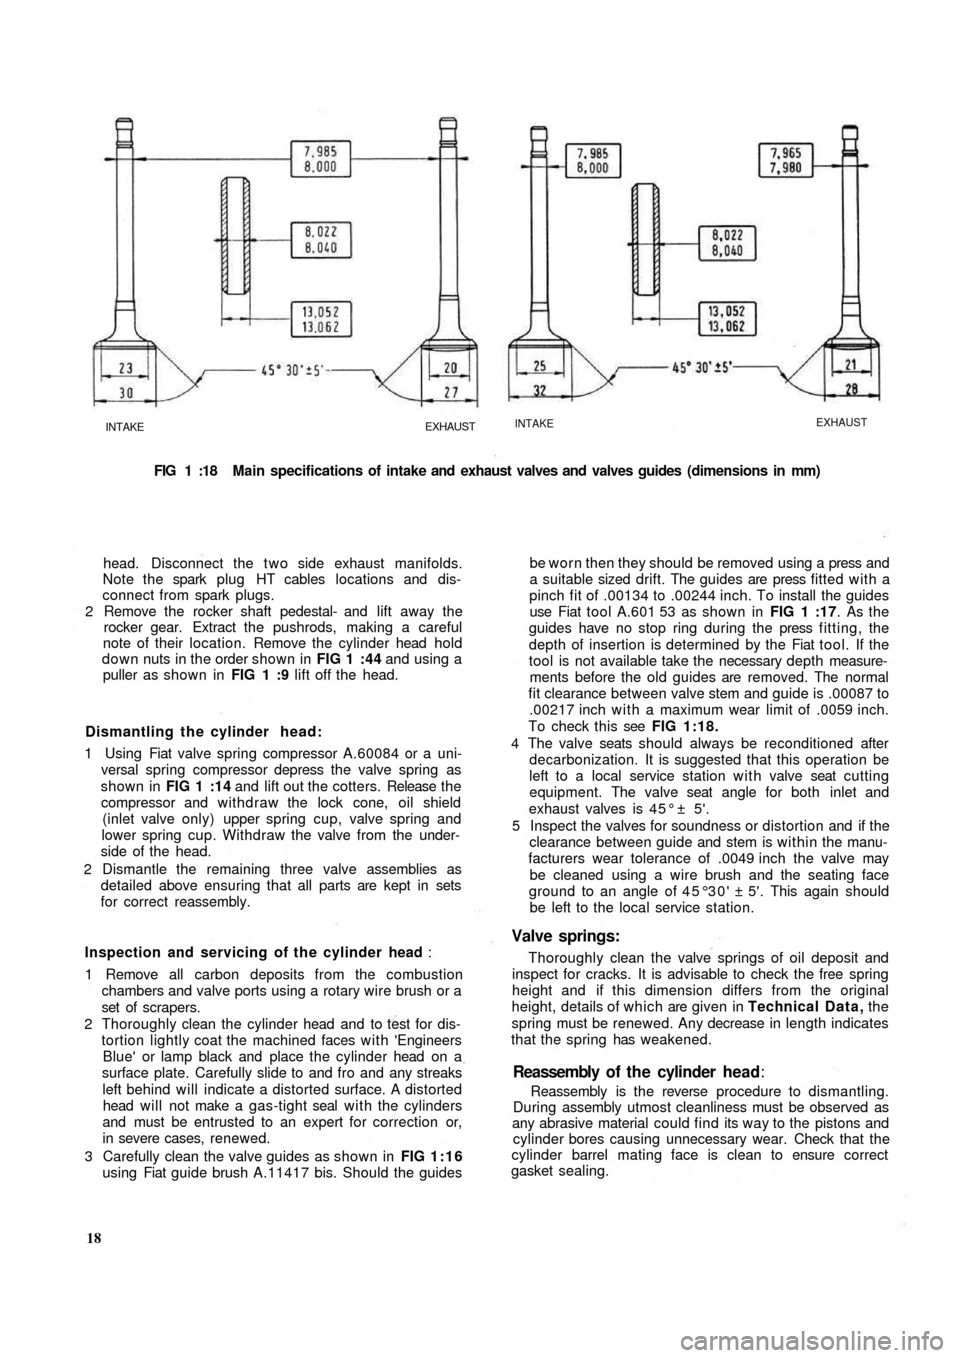 FIAT 500 1959 1.G Workshop Manual INTAKEEXHAUSTINTAKEEXHAUST
FIG 1 :18  Main specifications of intake and exhaust valves and valves guides (dimensions in  mm)
head. Disconnect the t w o side exhaust manifolds.
Note the spark  plug  HT